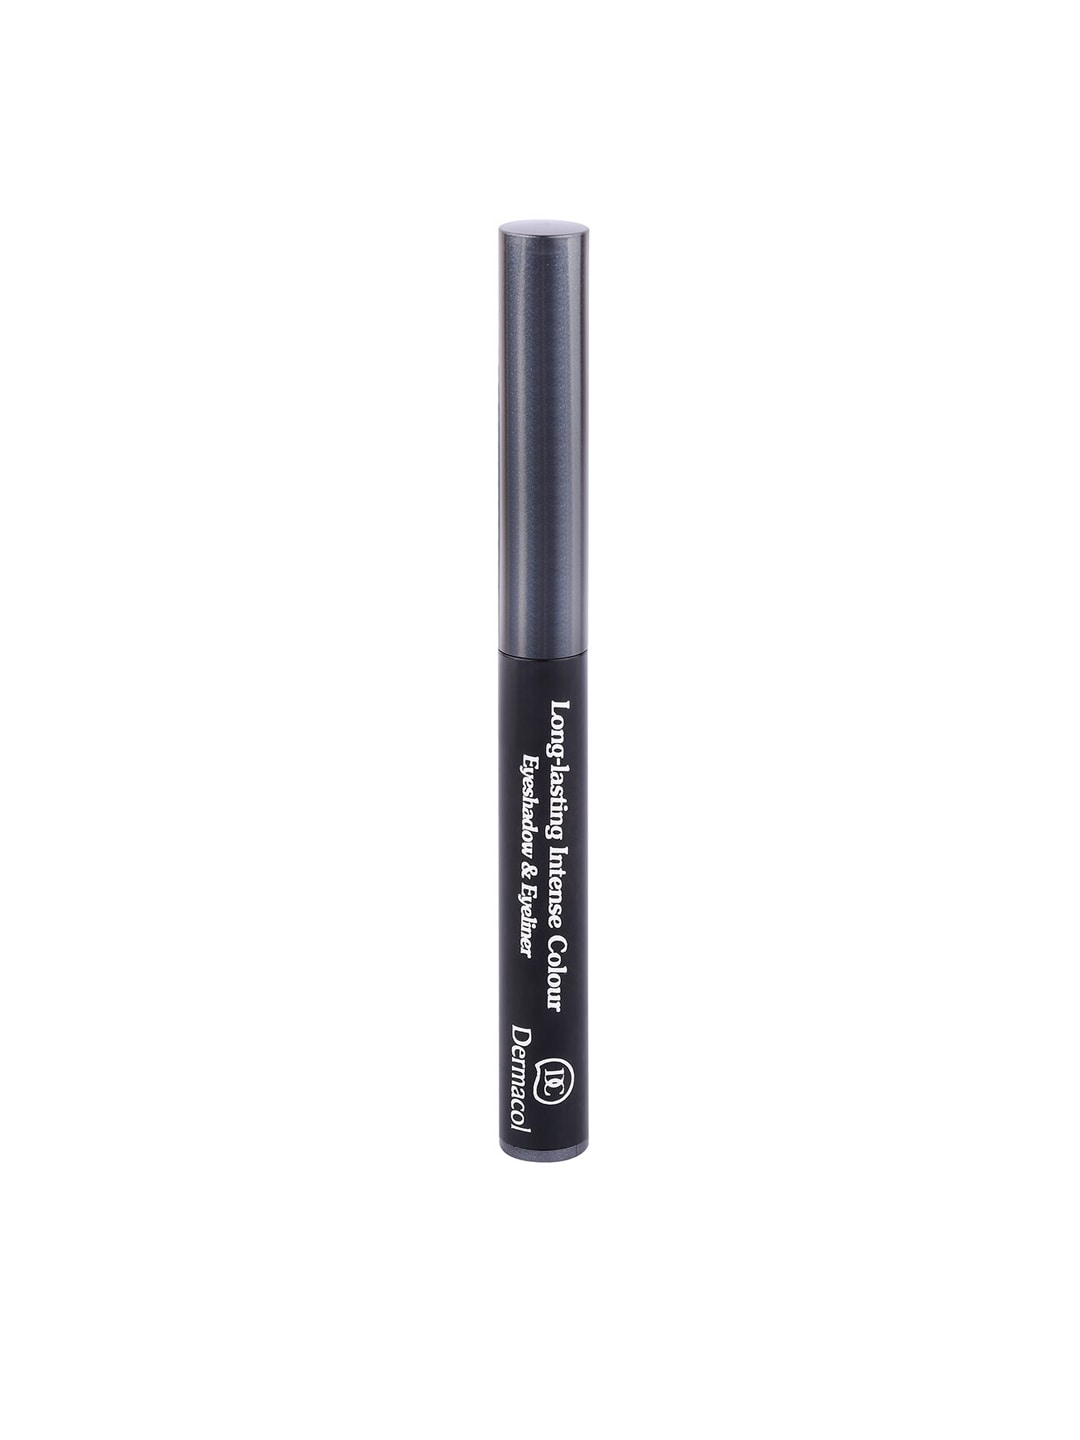 Dermacol 3107 Long-Lasting Intense Colour Eyeshadow No.8 Price in India